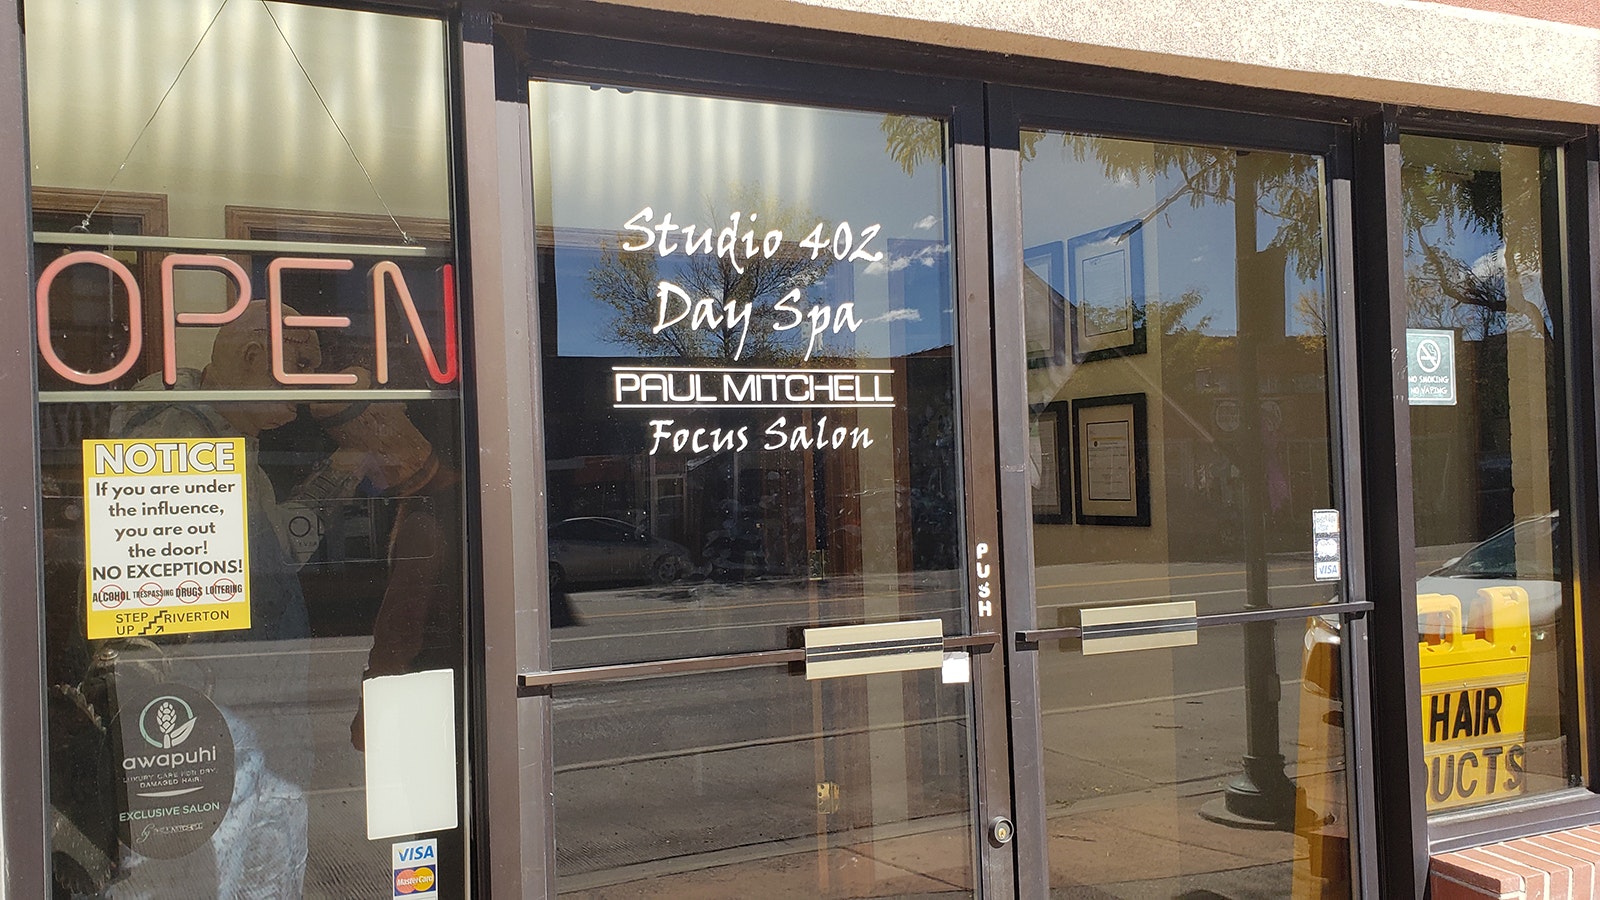 The Day Spa in Riverton is haunted, according to the owner.